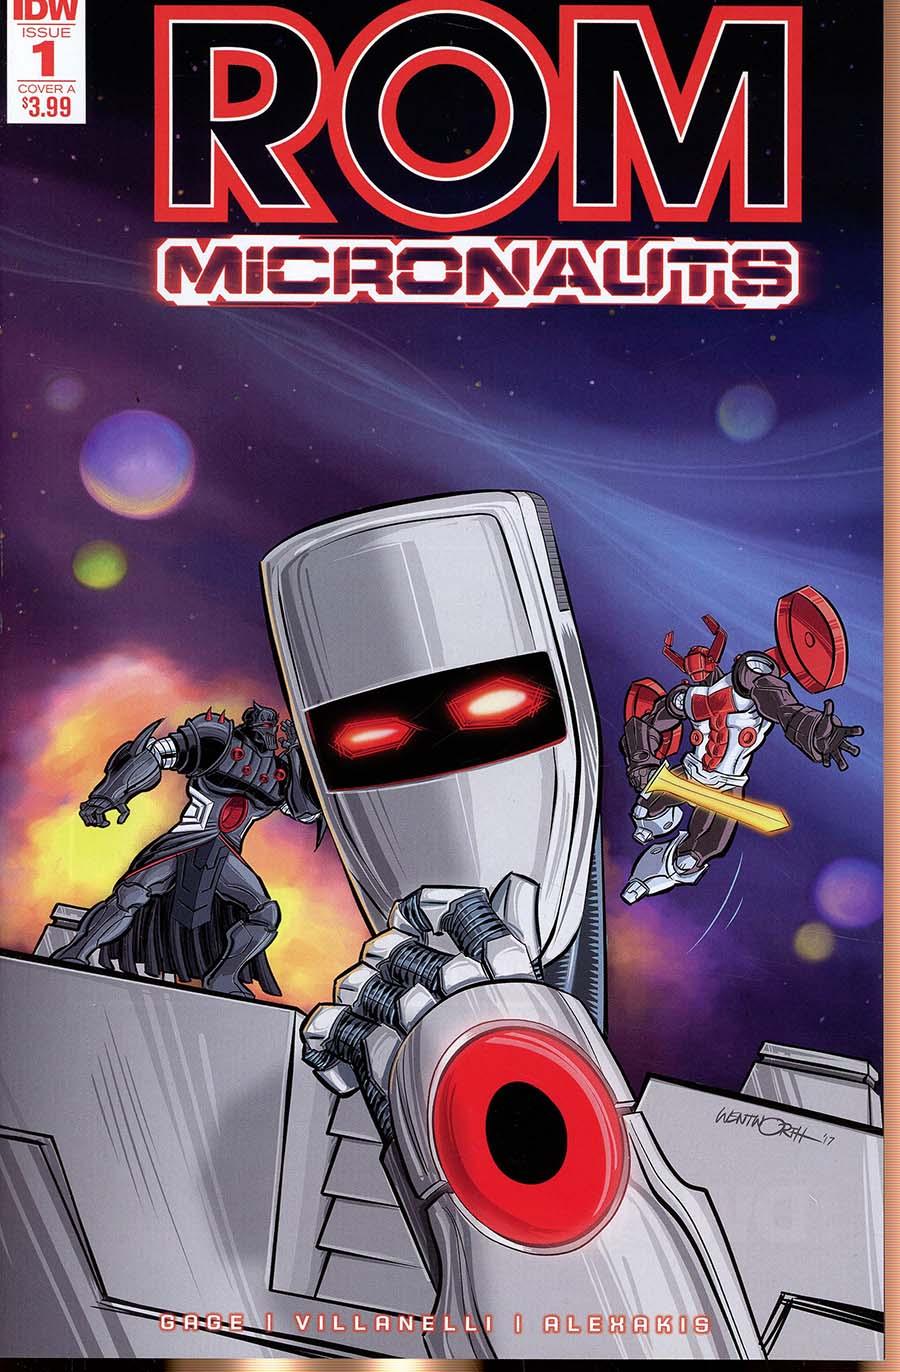 ROM And The Micronauts Vol. 1 #1